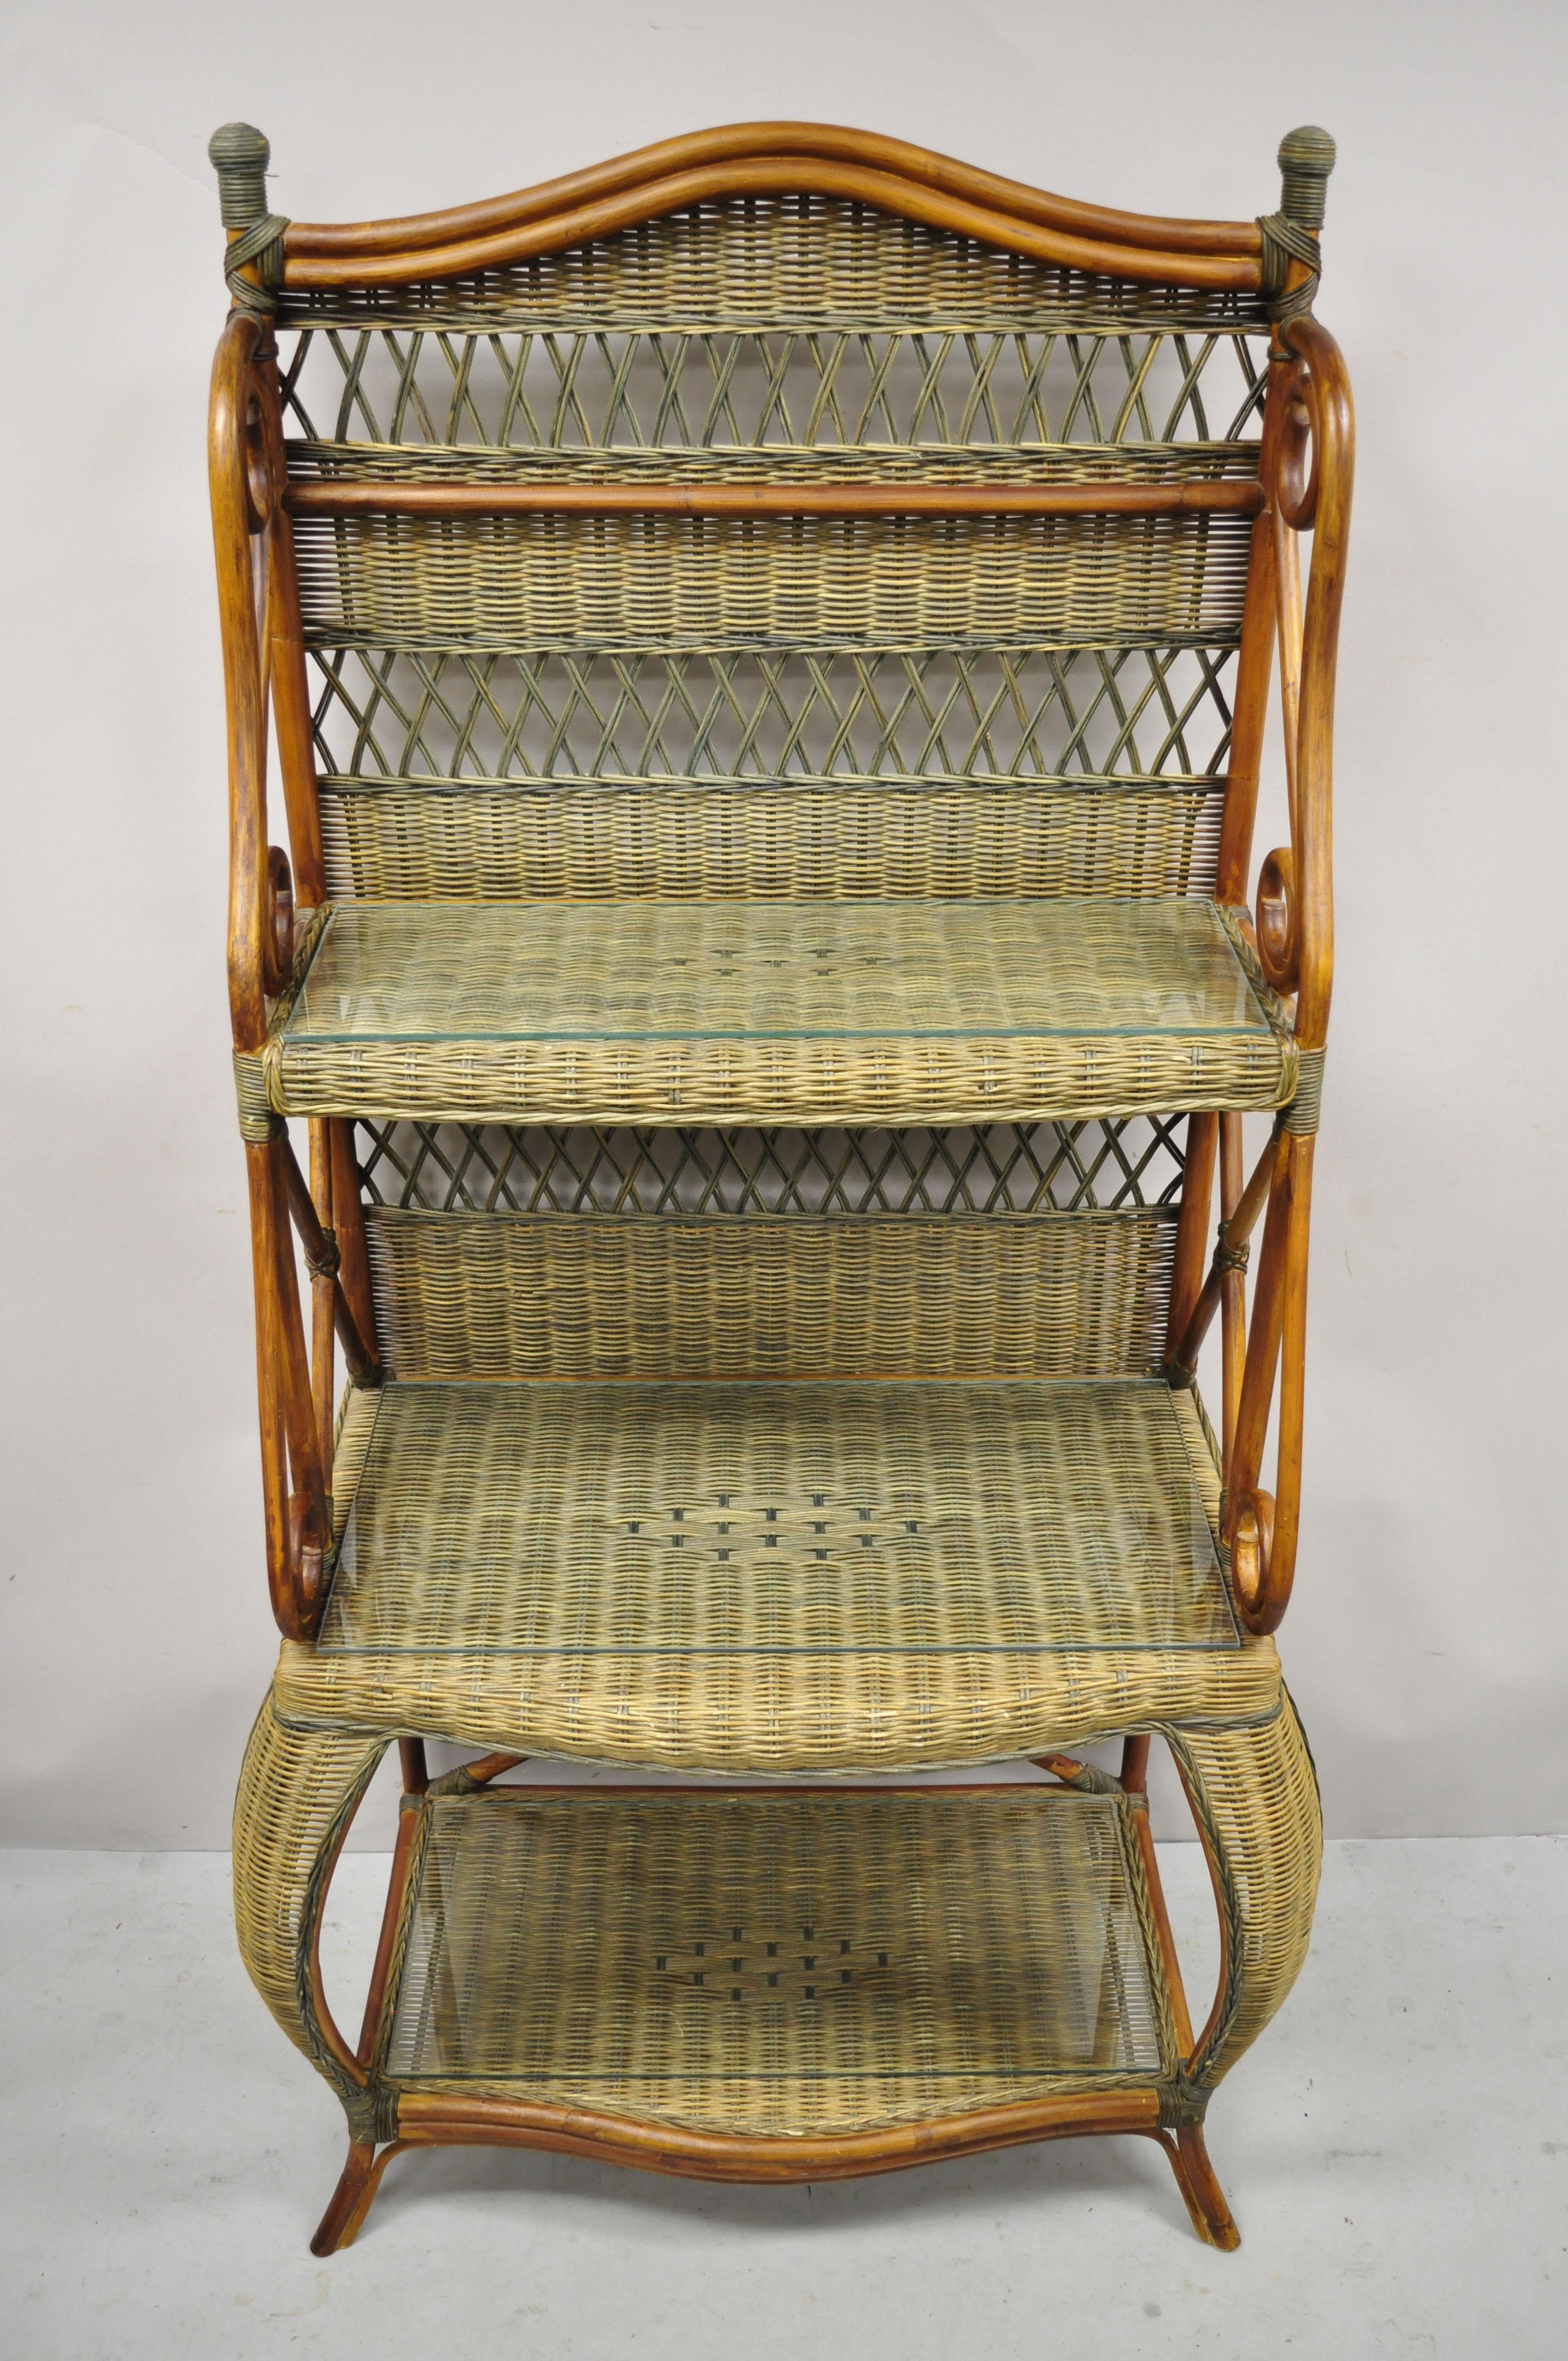 French Country style 3 tier wicker rattan wrapped frame kitchen bakers rack stand. Item features (3) glass shelves, synthetic wicker wrapped frame, (3) tiers, shapely design, great style and form. Circa 20-21st Century, Pre-owned. Measurements: